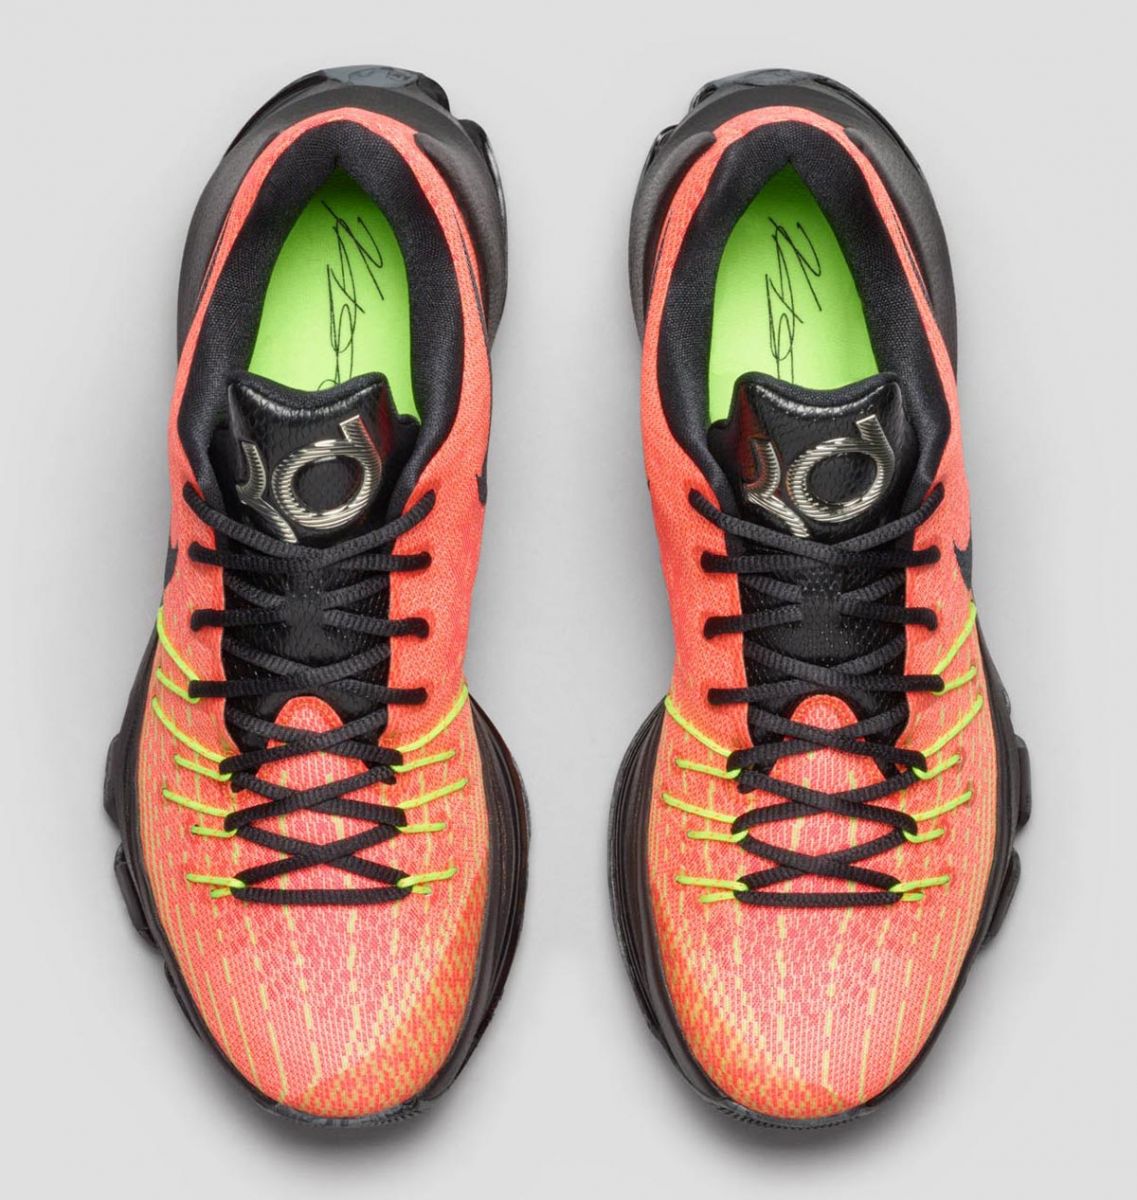 Sun Rises on This Nike KD 8 Colorway 